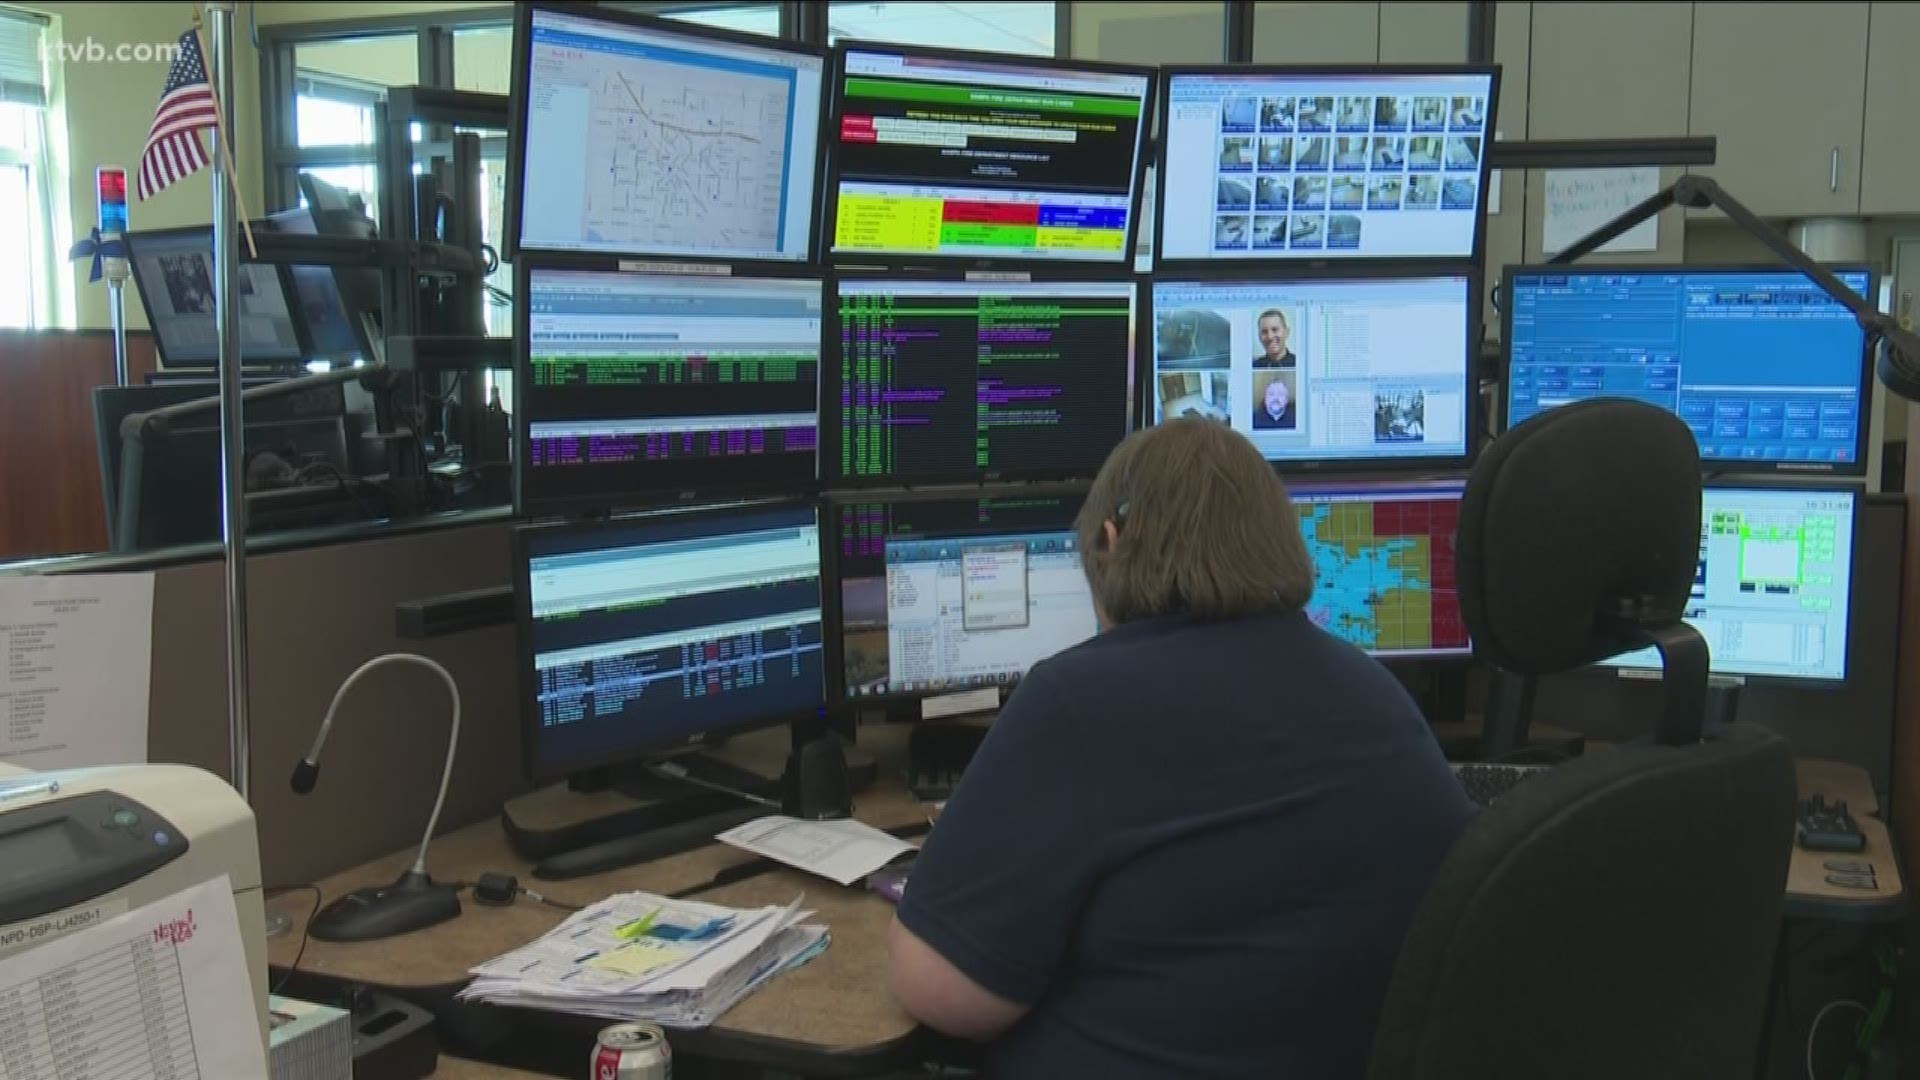 KTVB verifies whether there's a secret "pizza" code to let dispatchers know you're in trouble.